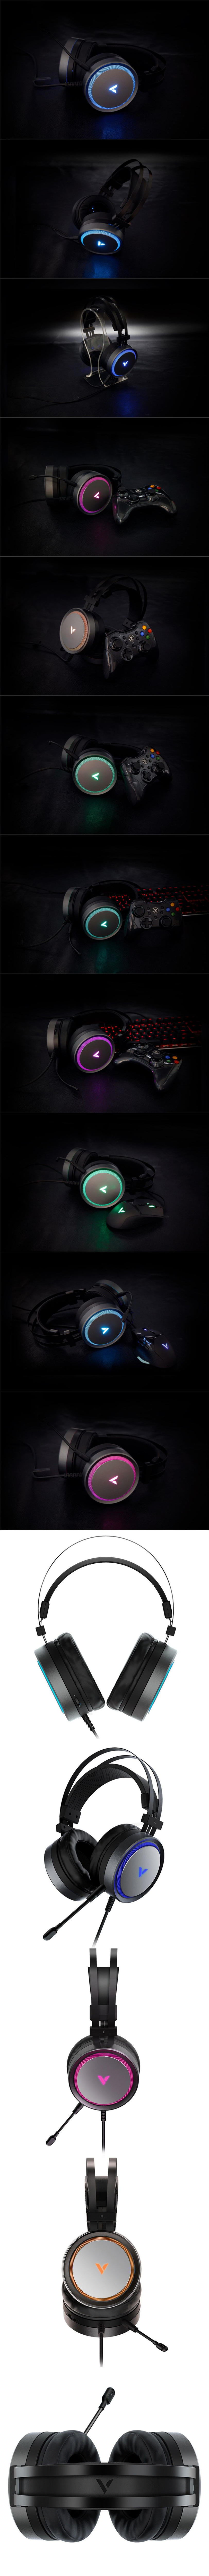 Rapoo-VH530-Gaming-Headset-71-Channel-USB-Surround-Sound-Breathing-LED-Backlight-Headphone-with-Micr-1474926